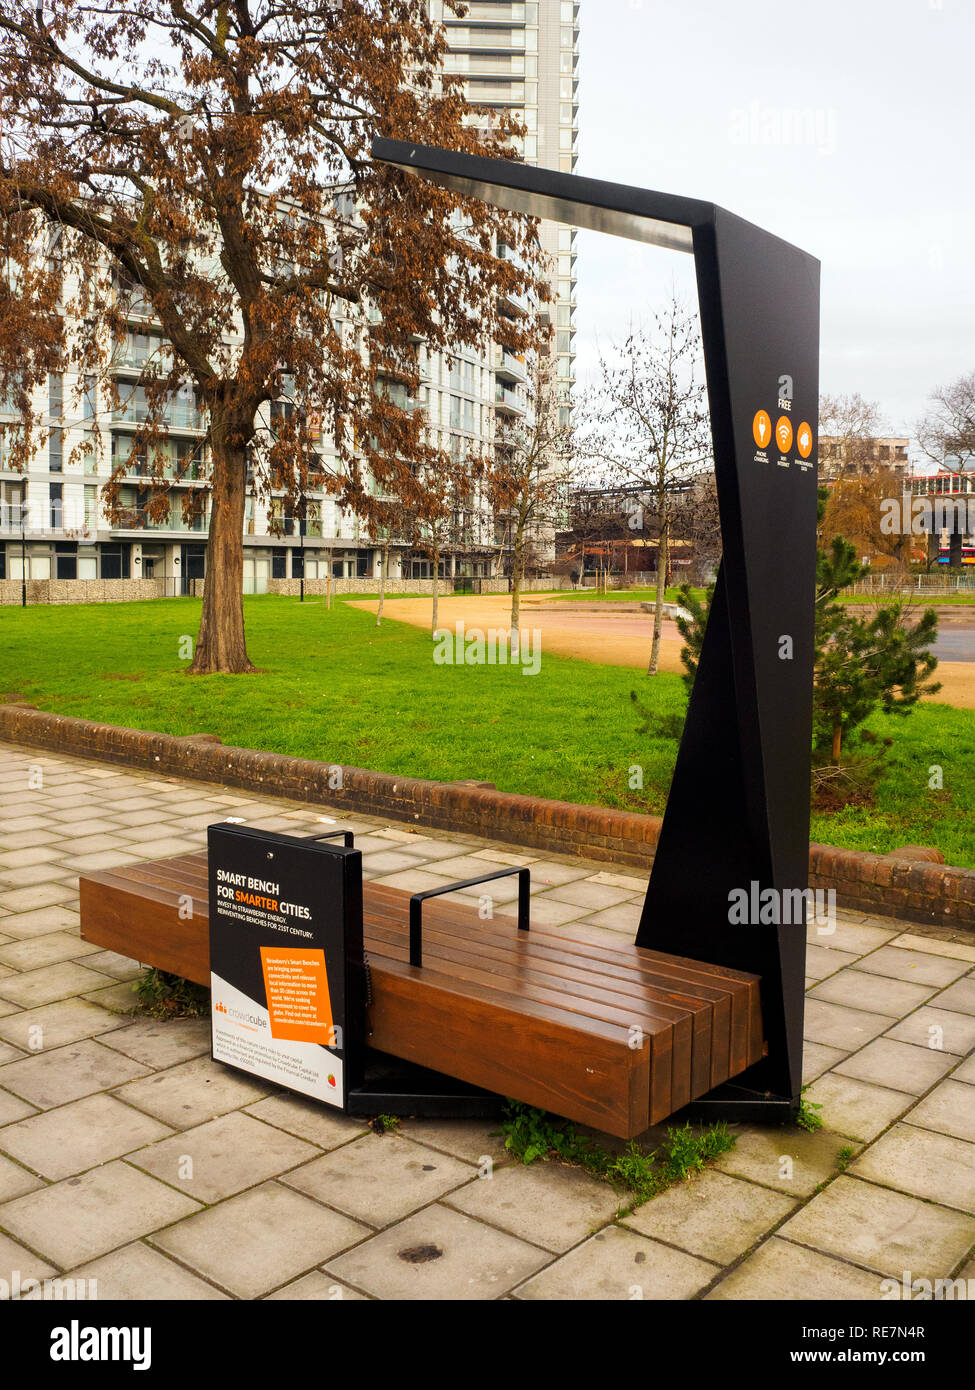 Public solar-powered 'smart bench' for charging mobile devices and wi-fi internet connection in Deptford - London, England Stock Photo